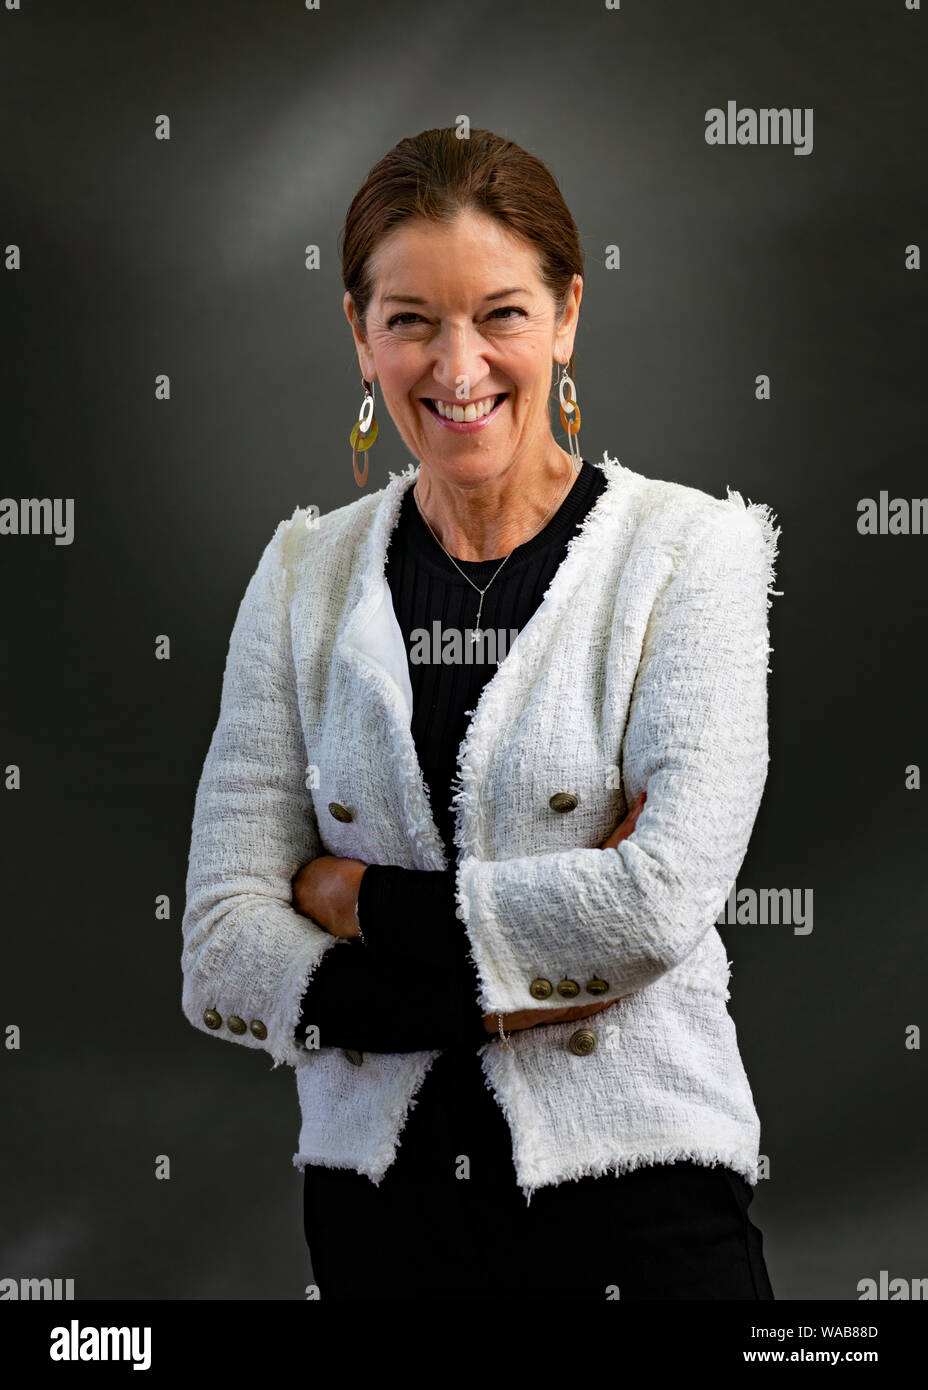 Edinburgh, Scotland, UK. 19 August 2019. Victoria Hislop. Victoria HislopÕs Those Who Are loved is set amid tumultuous Mediterranean history. Themis survives the Nazi occupation of Greece only to become embroiled in the ensuing civil war. Iain Masterton/Alamy Live News. Stock Photo